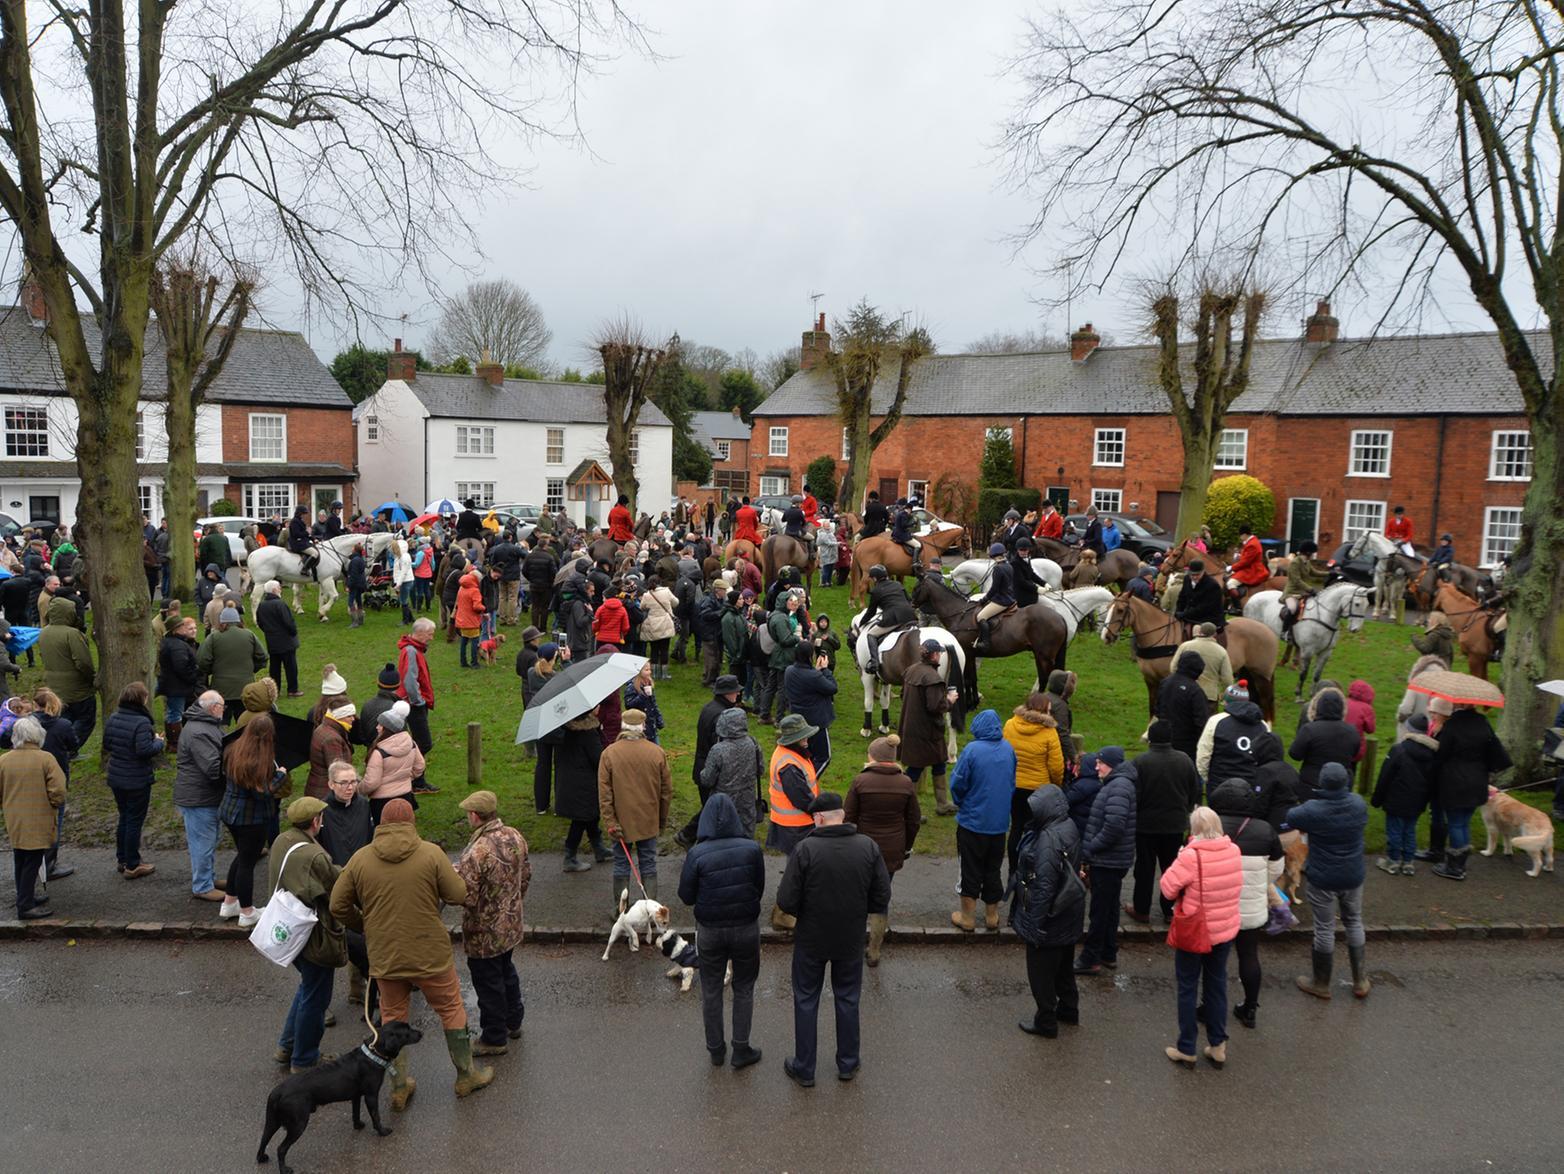 Busy scenes during the Fernie Hunt Boxing Day meet in Great Bowden.